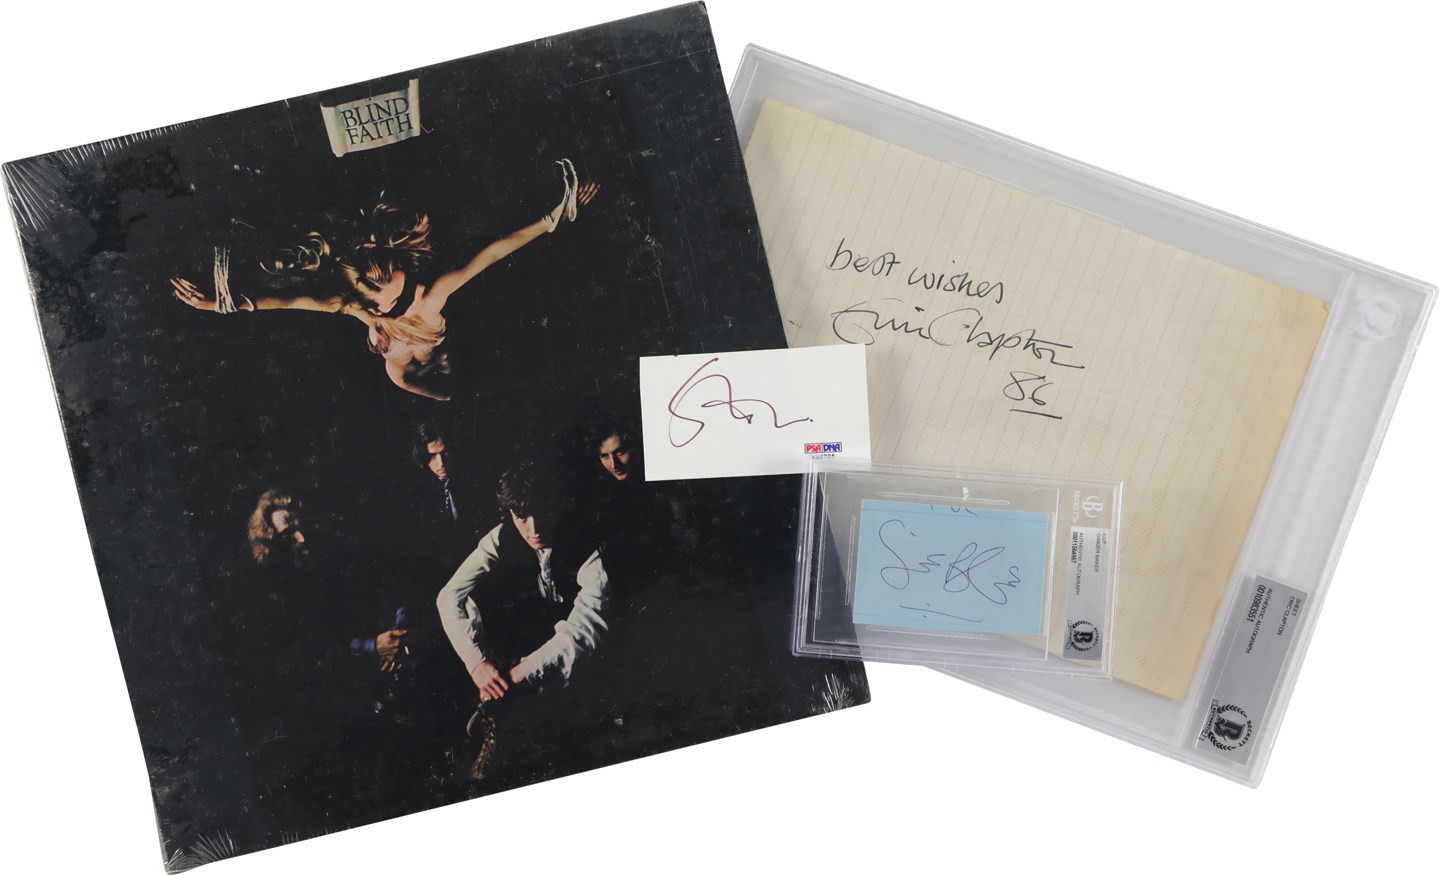 Rock And Pop Culture - Blind Faith Complete Autograph Collection with One of the Best Vintage Eric Clapton Full Name Signatures